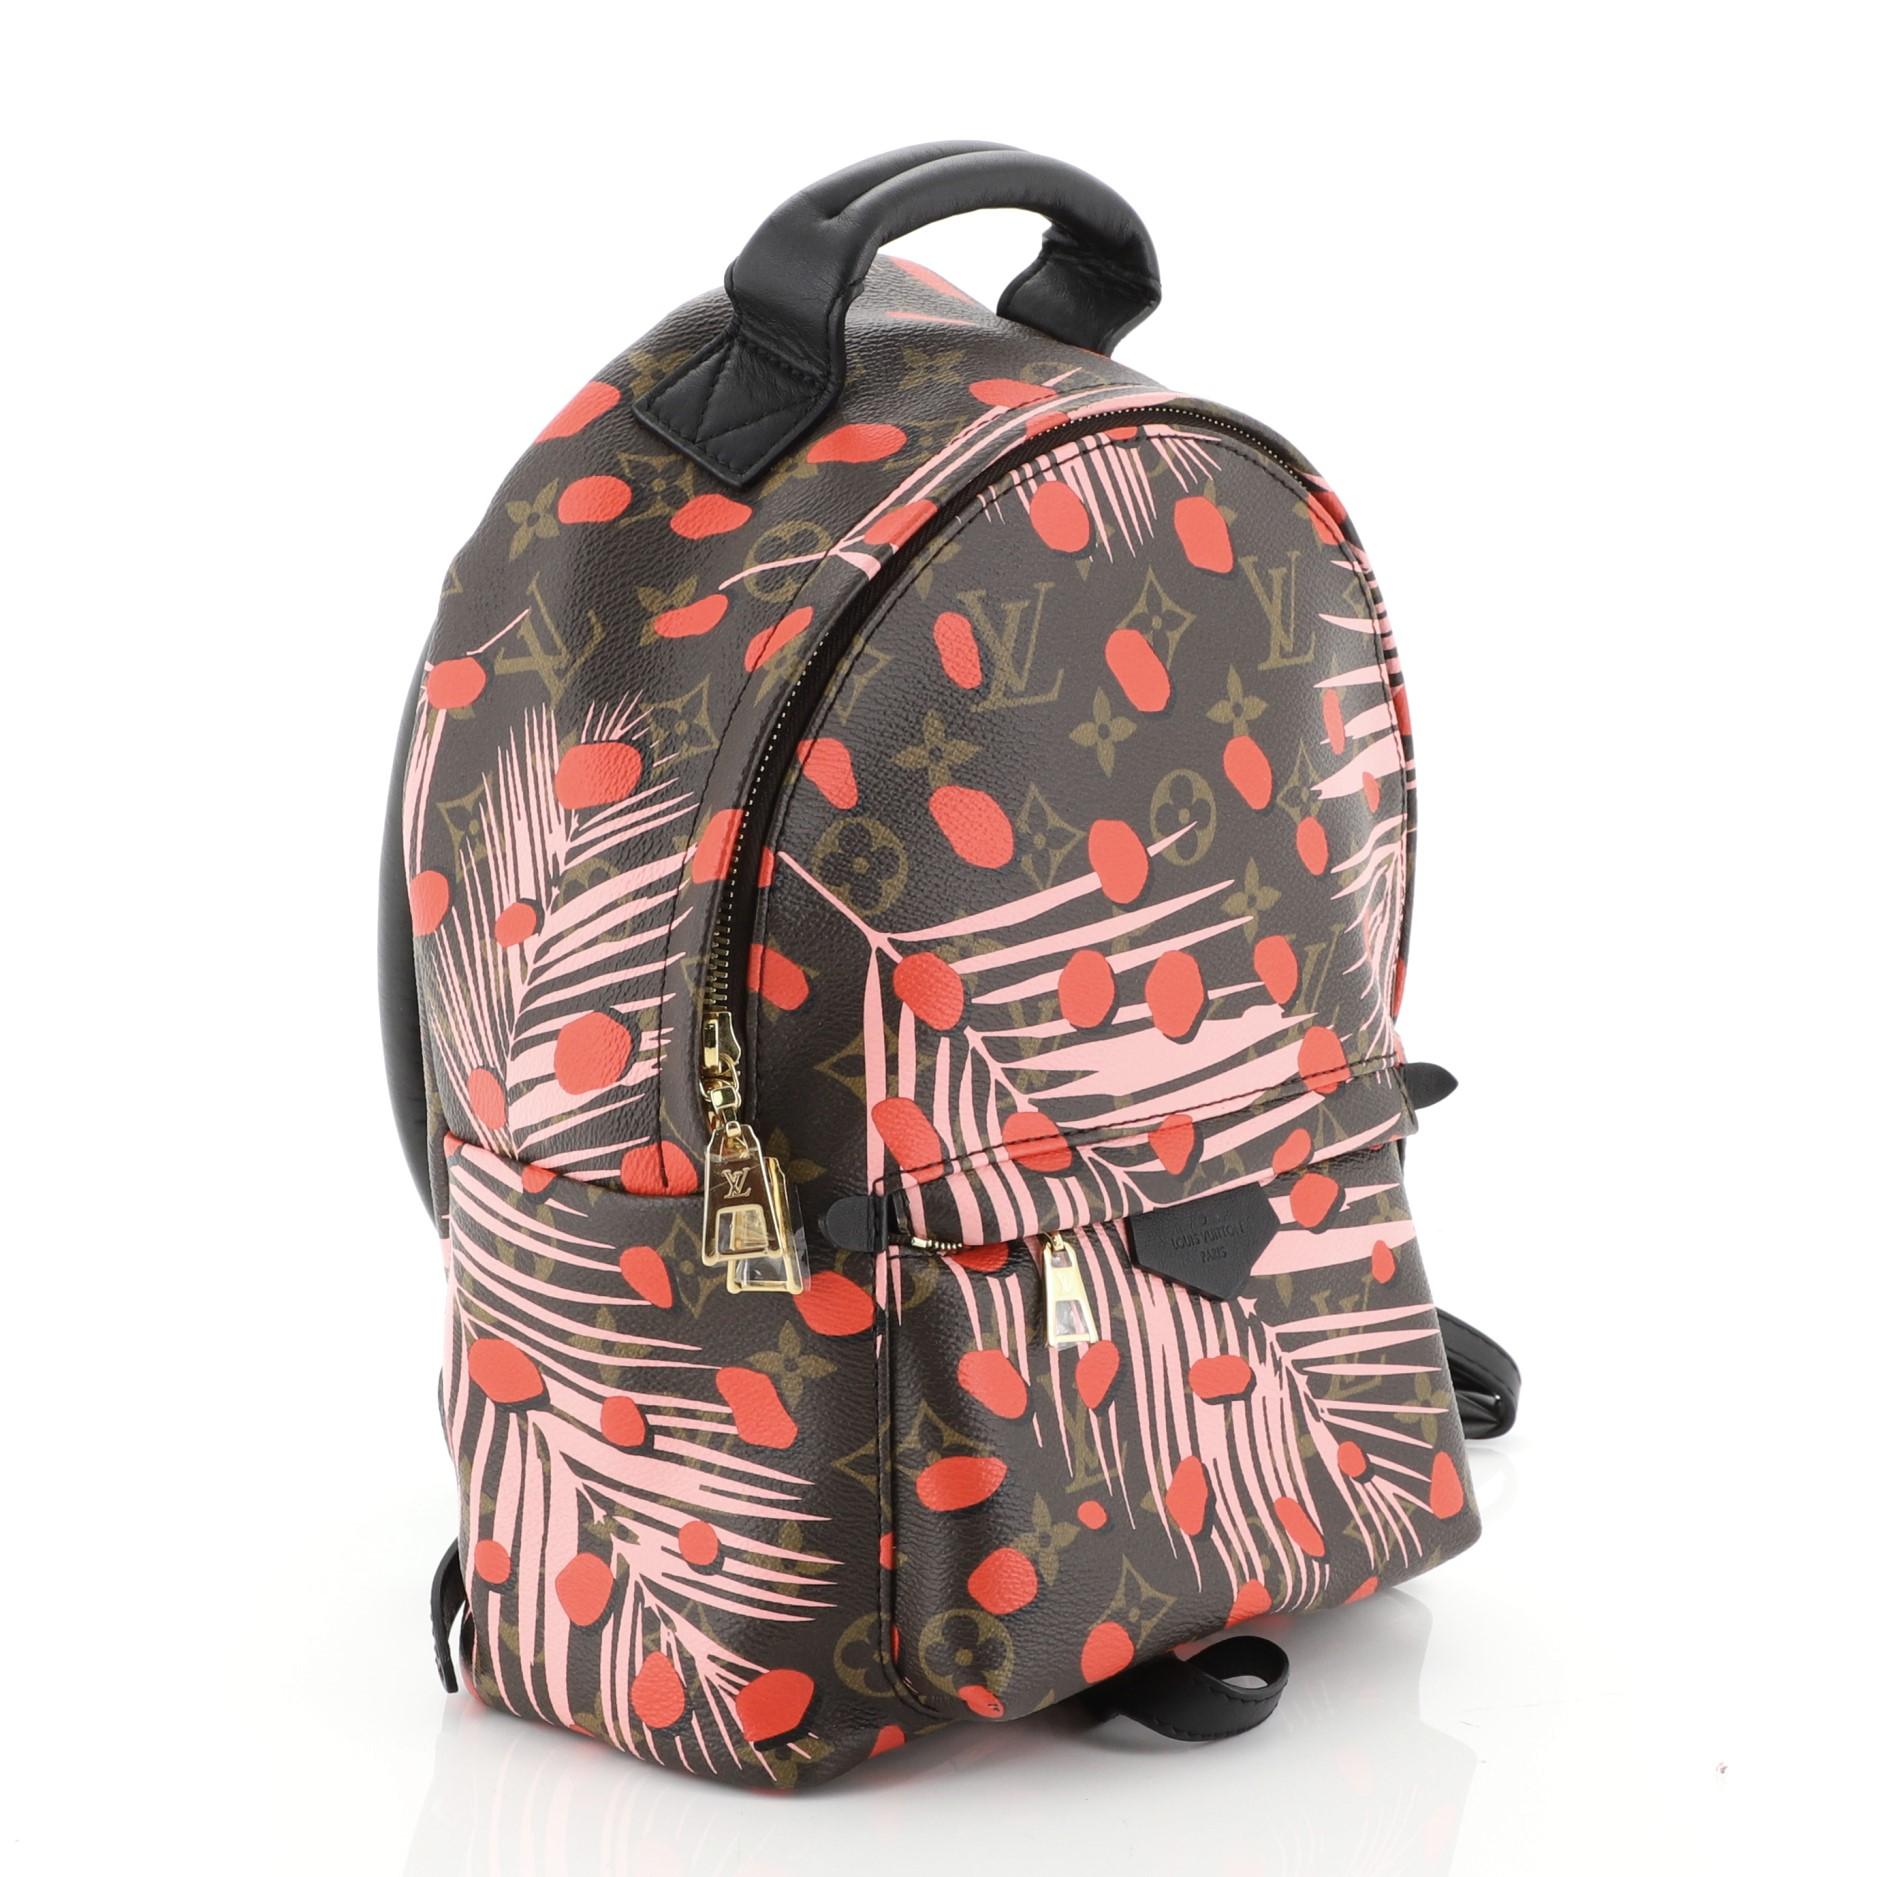 This Louis Vuitton Palm Springs Backpack Limited Edition Monogram Jungle Dots PM, crafted from brown monogram pink and red jungle dots coated canvas, features adjustable shoulder straps, leather top handle, front zip pocket, and gold-tone hardware.